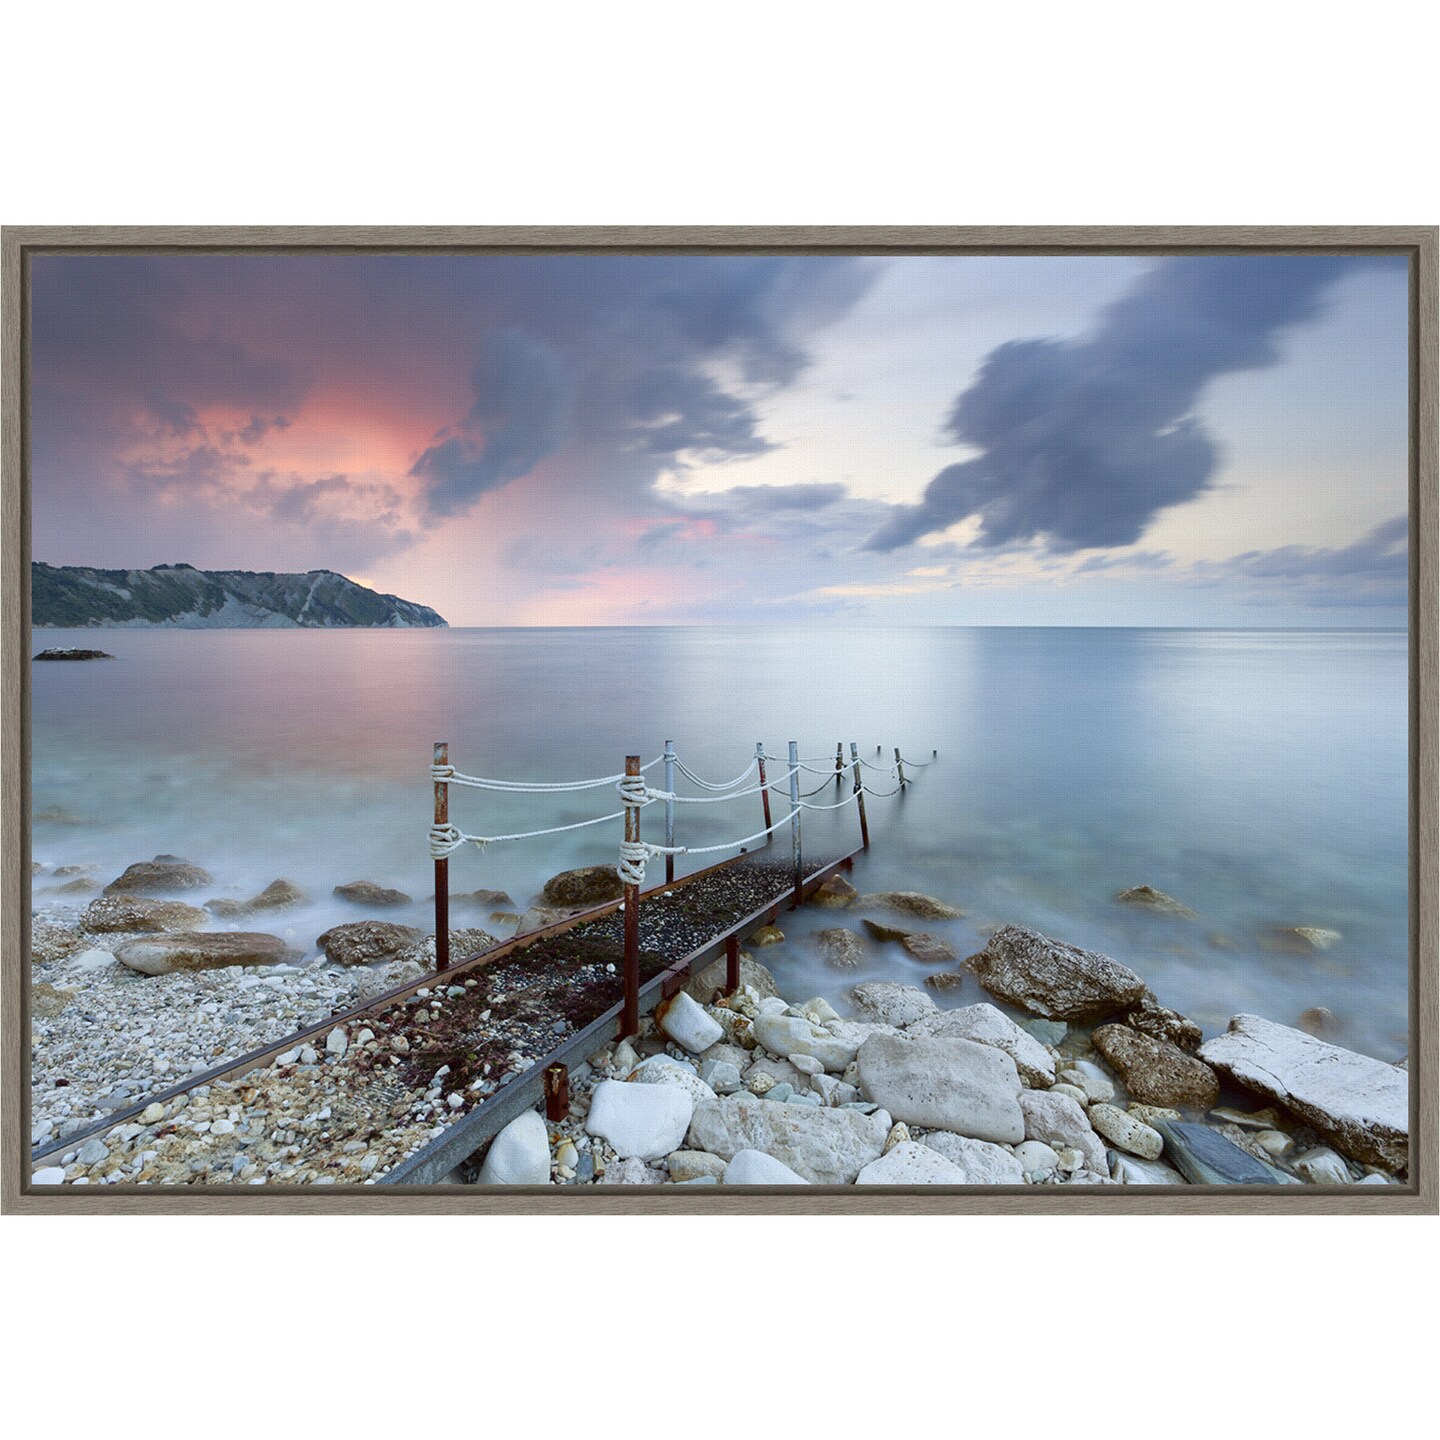 Path To The Light by Claudio Coppari 23-in. W x 16-in. H. Canvas Wall Art Print Framed in Grey